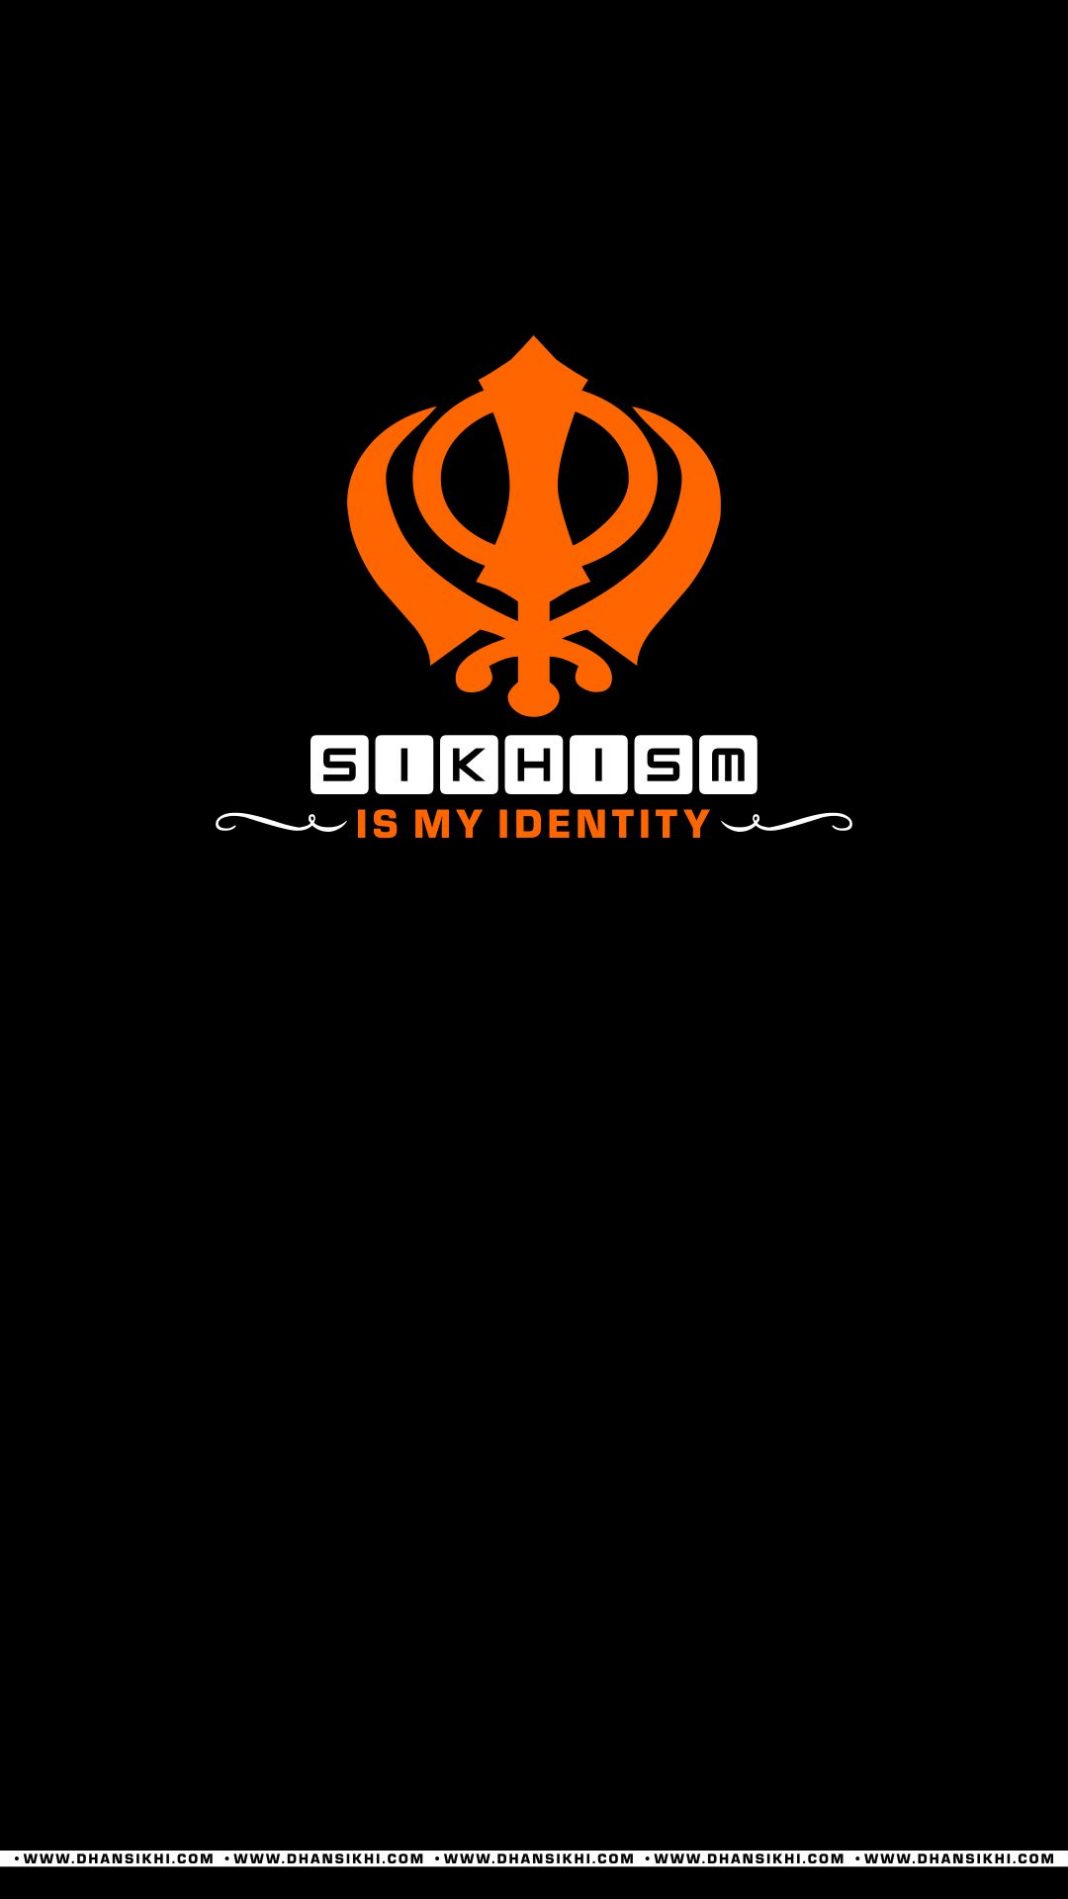 Mobile Wallpaper - Sikhism Is My Identity